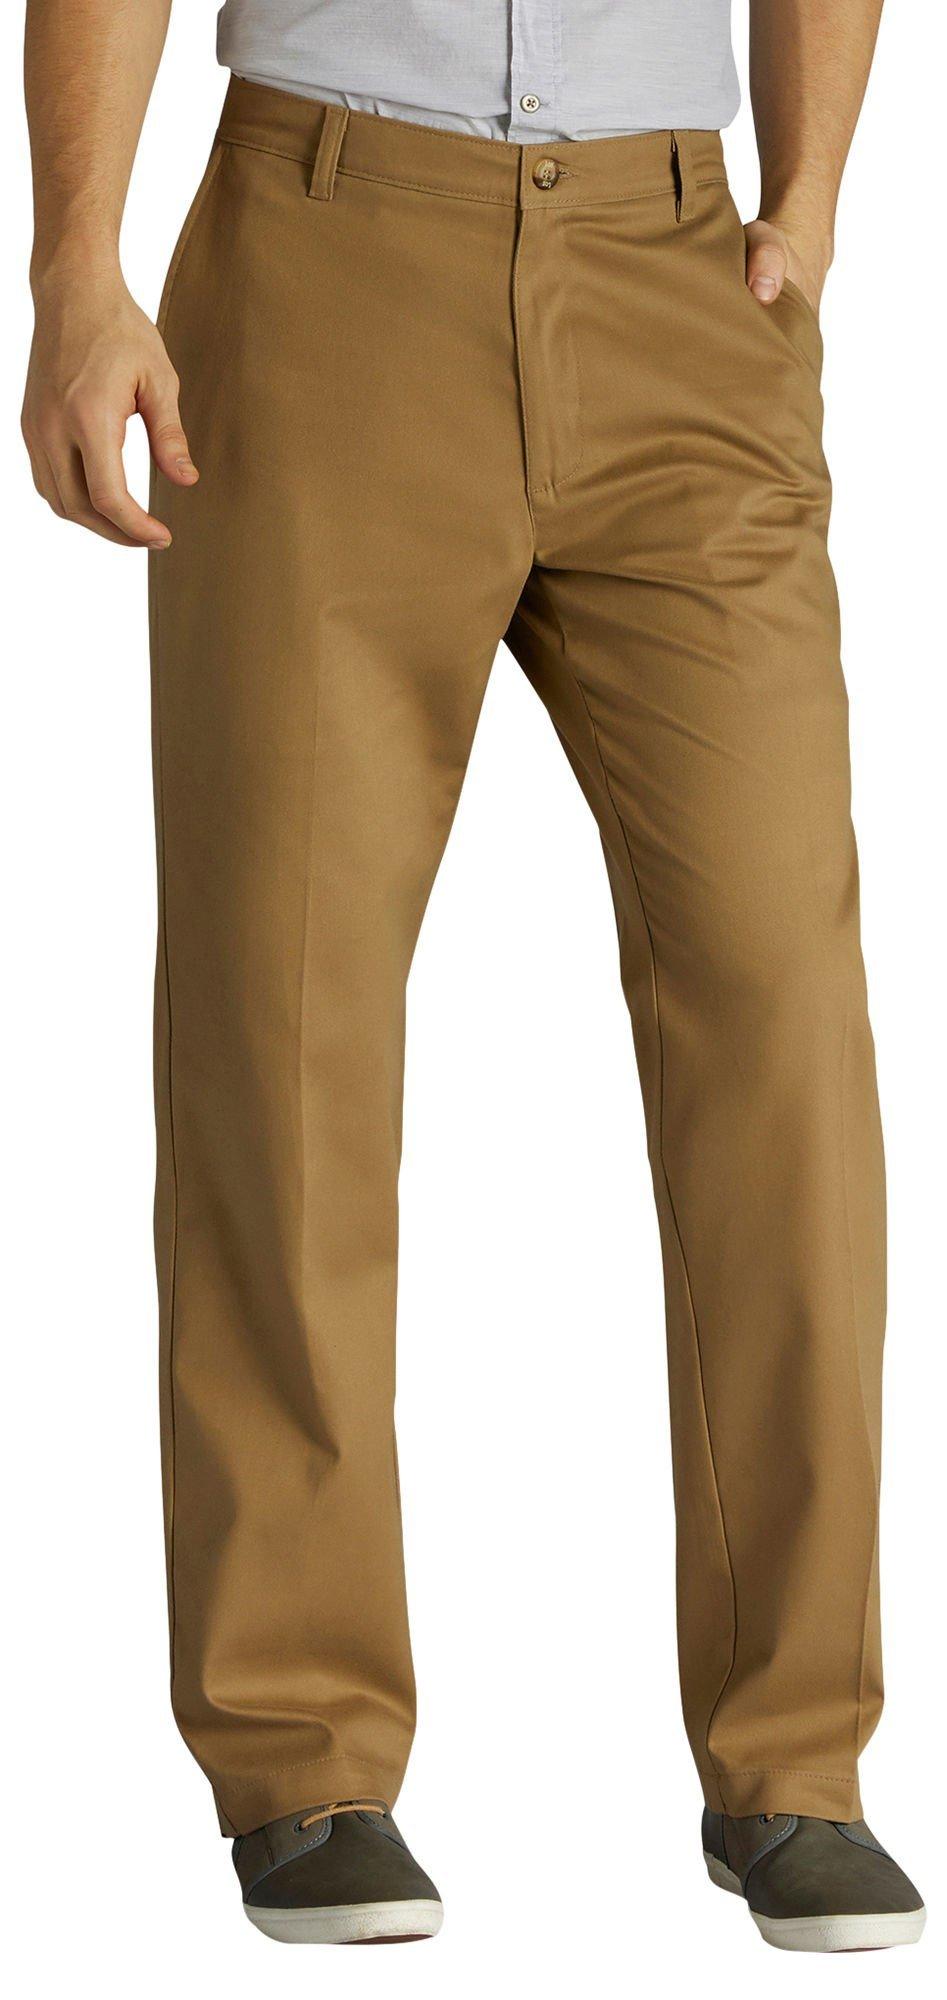 lee men's total freedom relaxed classic fit flat front pant